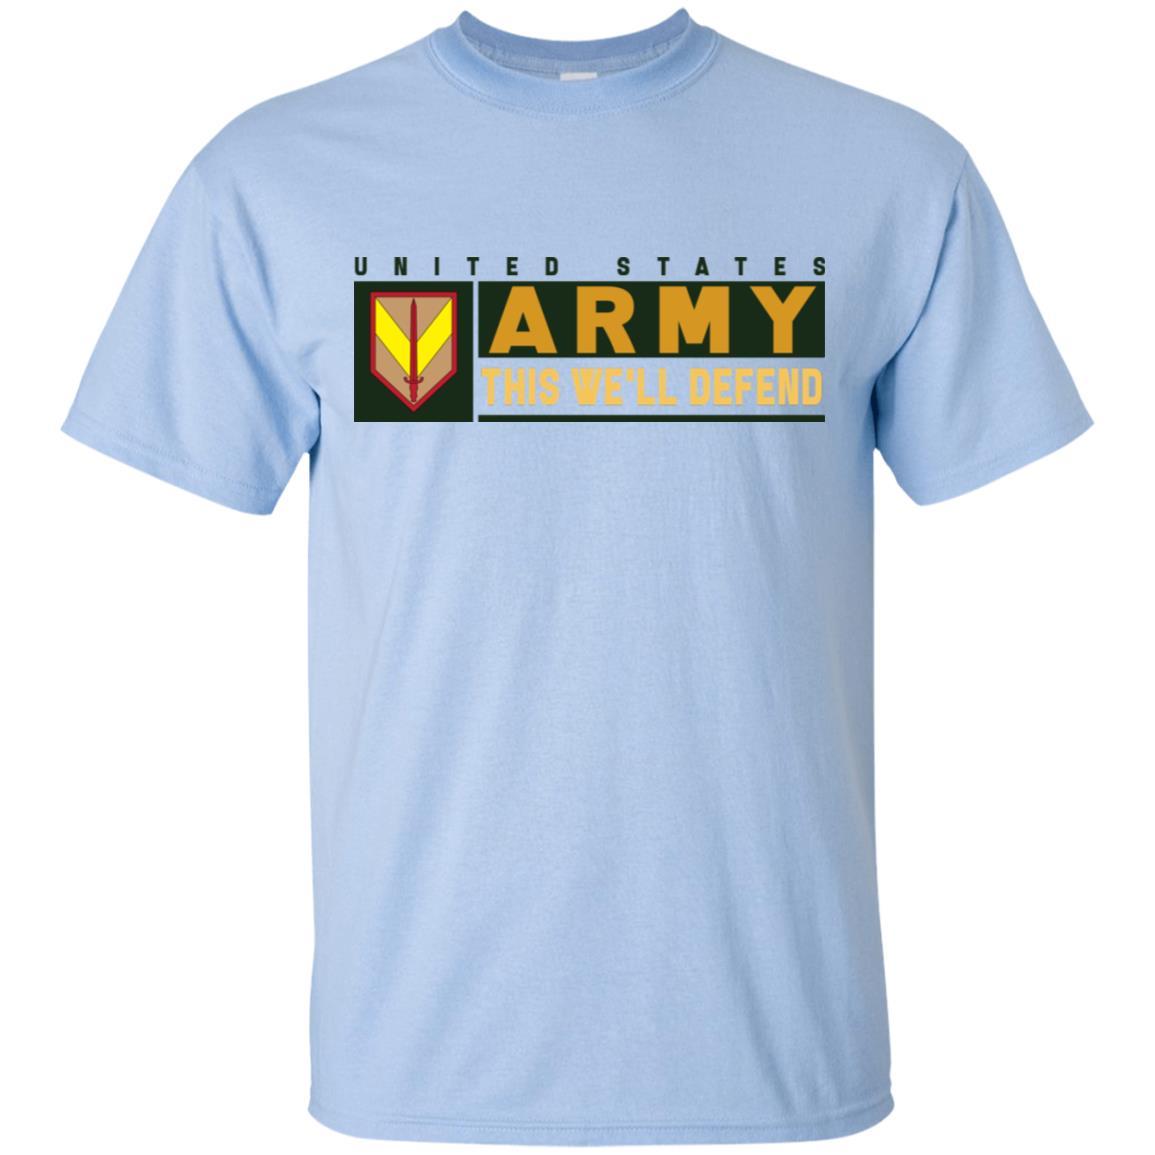 US Army 1ST SUSTAINMENT- This We'll Defend T-Shirt On Front For Men-TShirt-Army-Veterans Nation